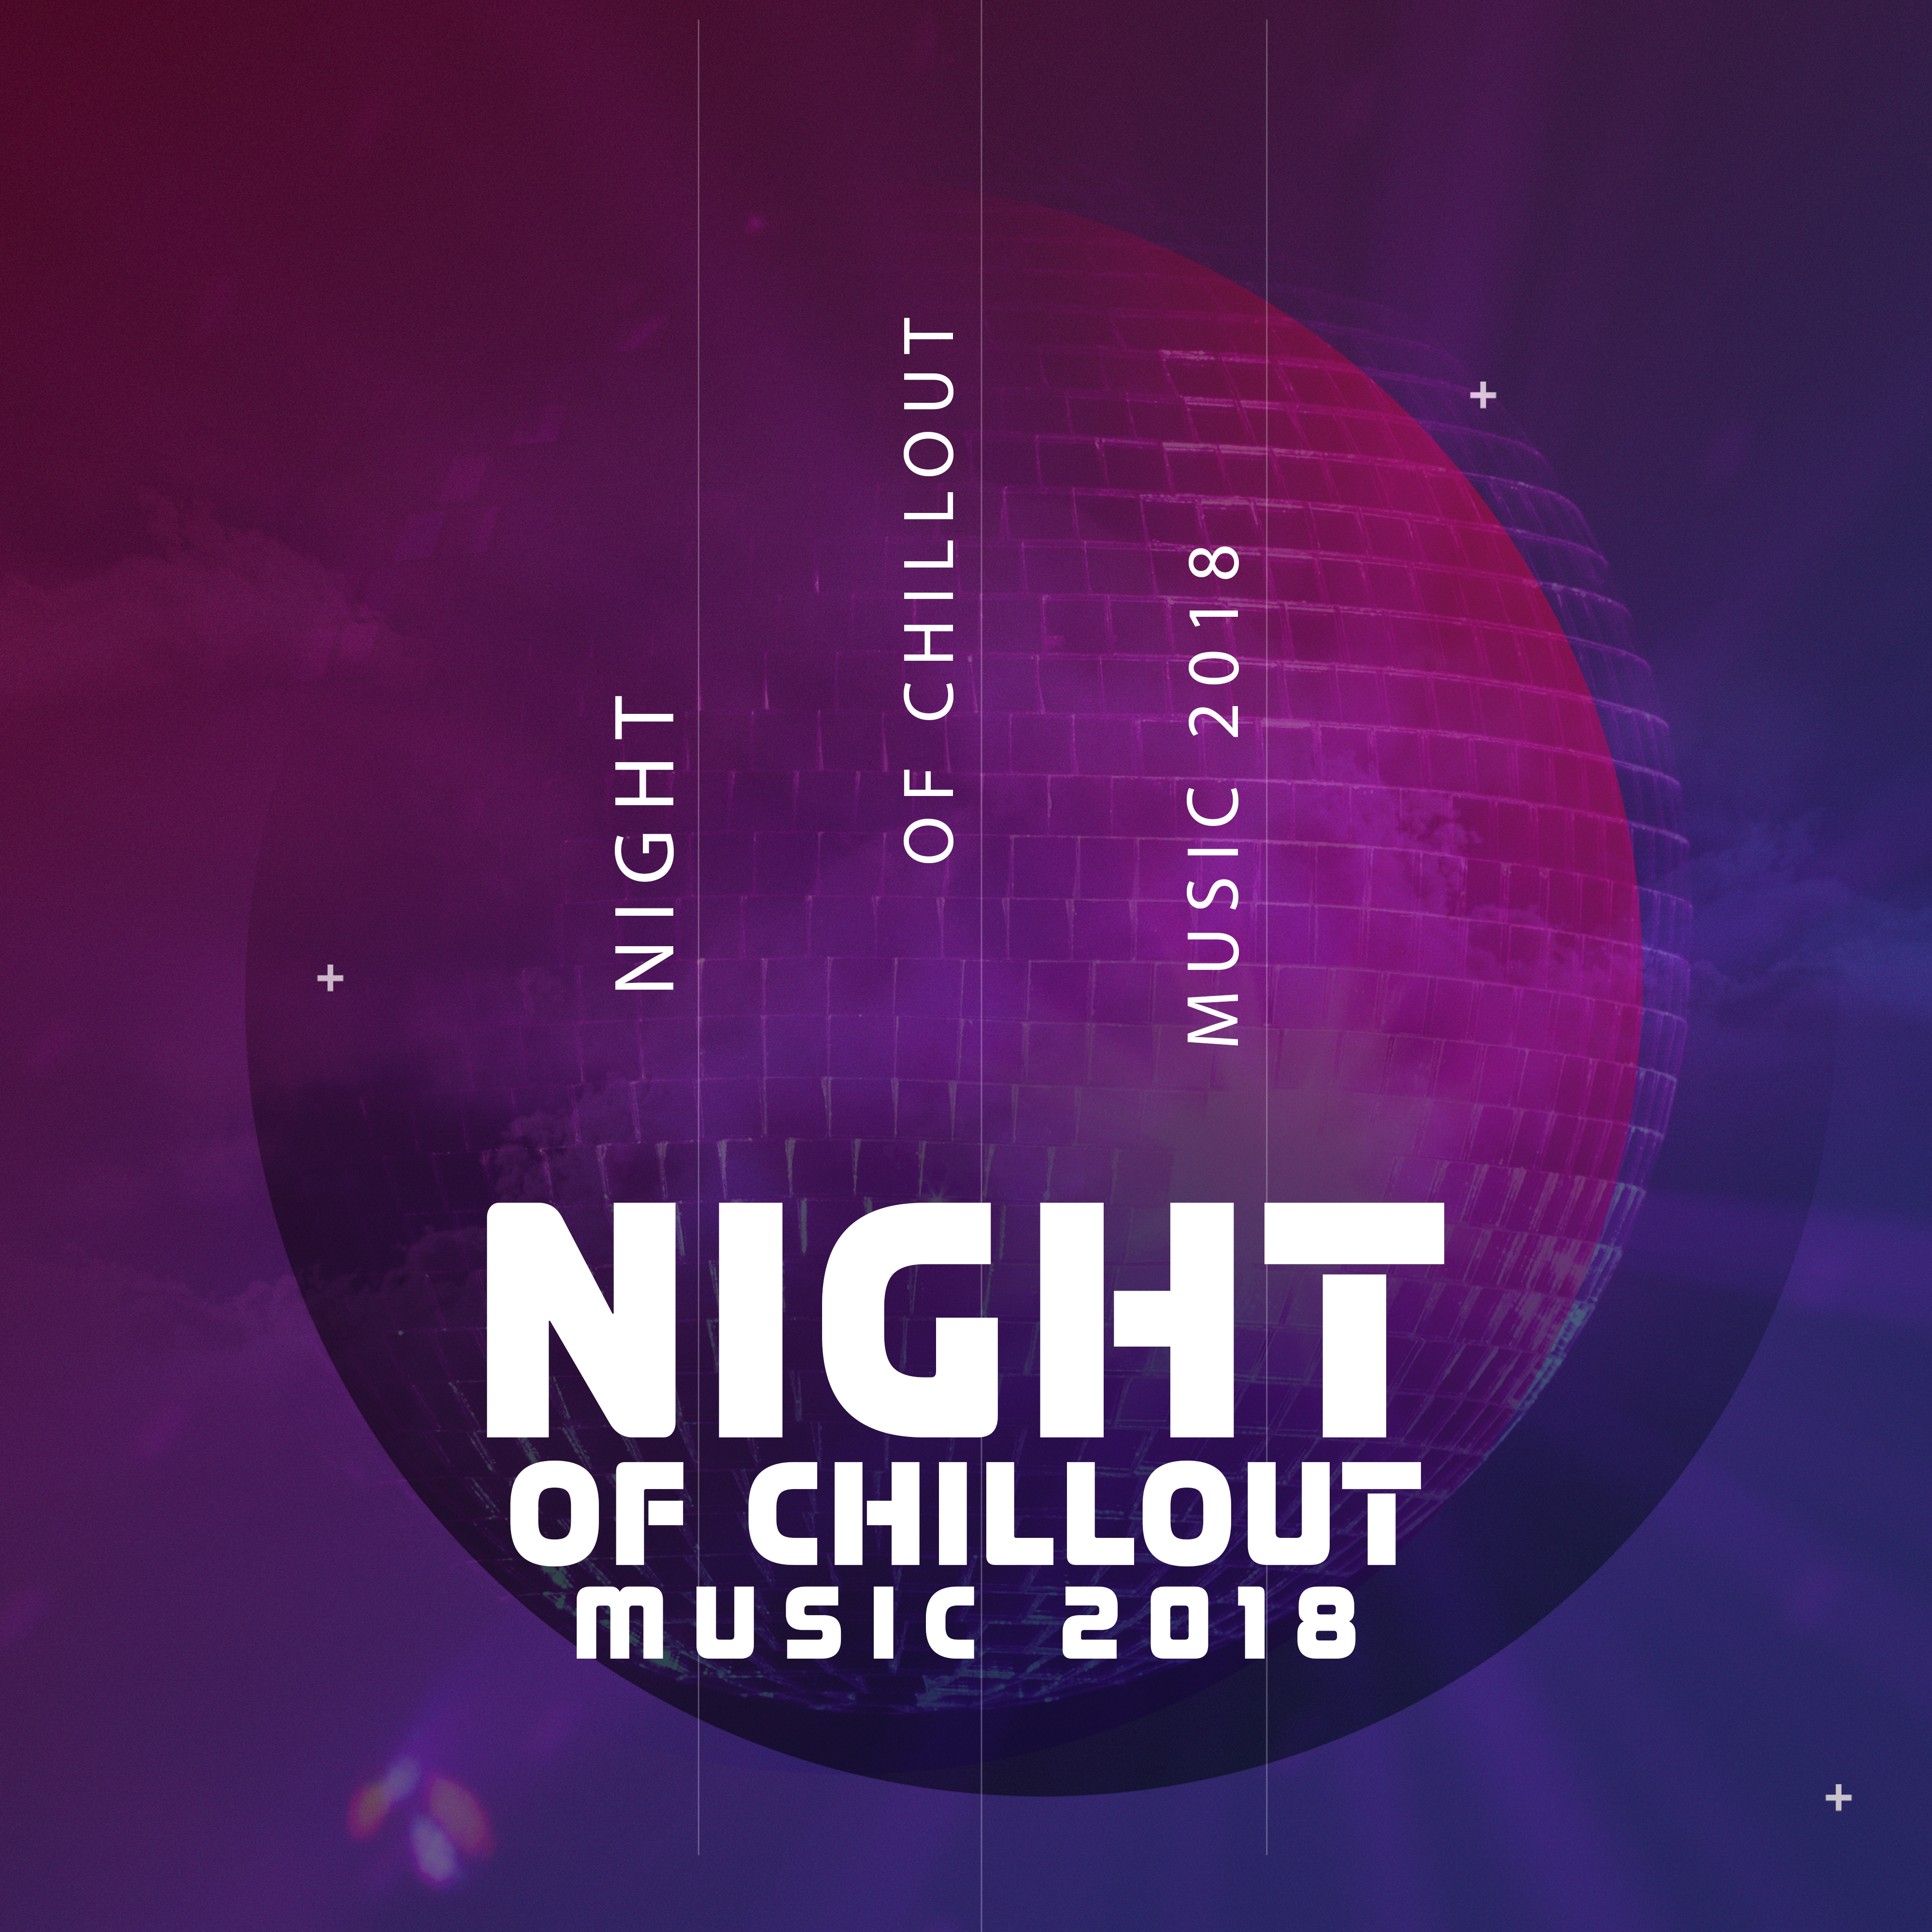 Night of Chillout Music 2018